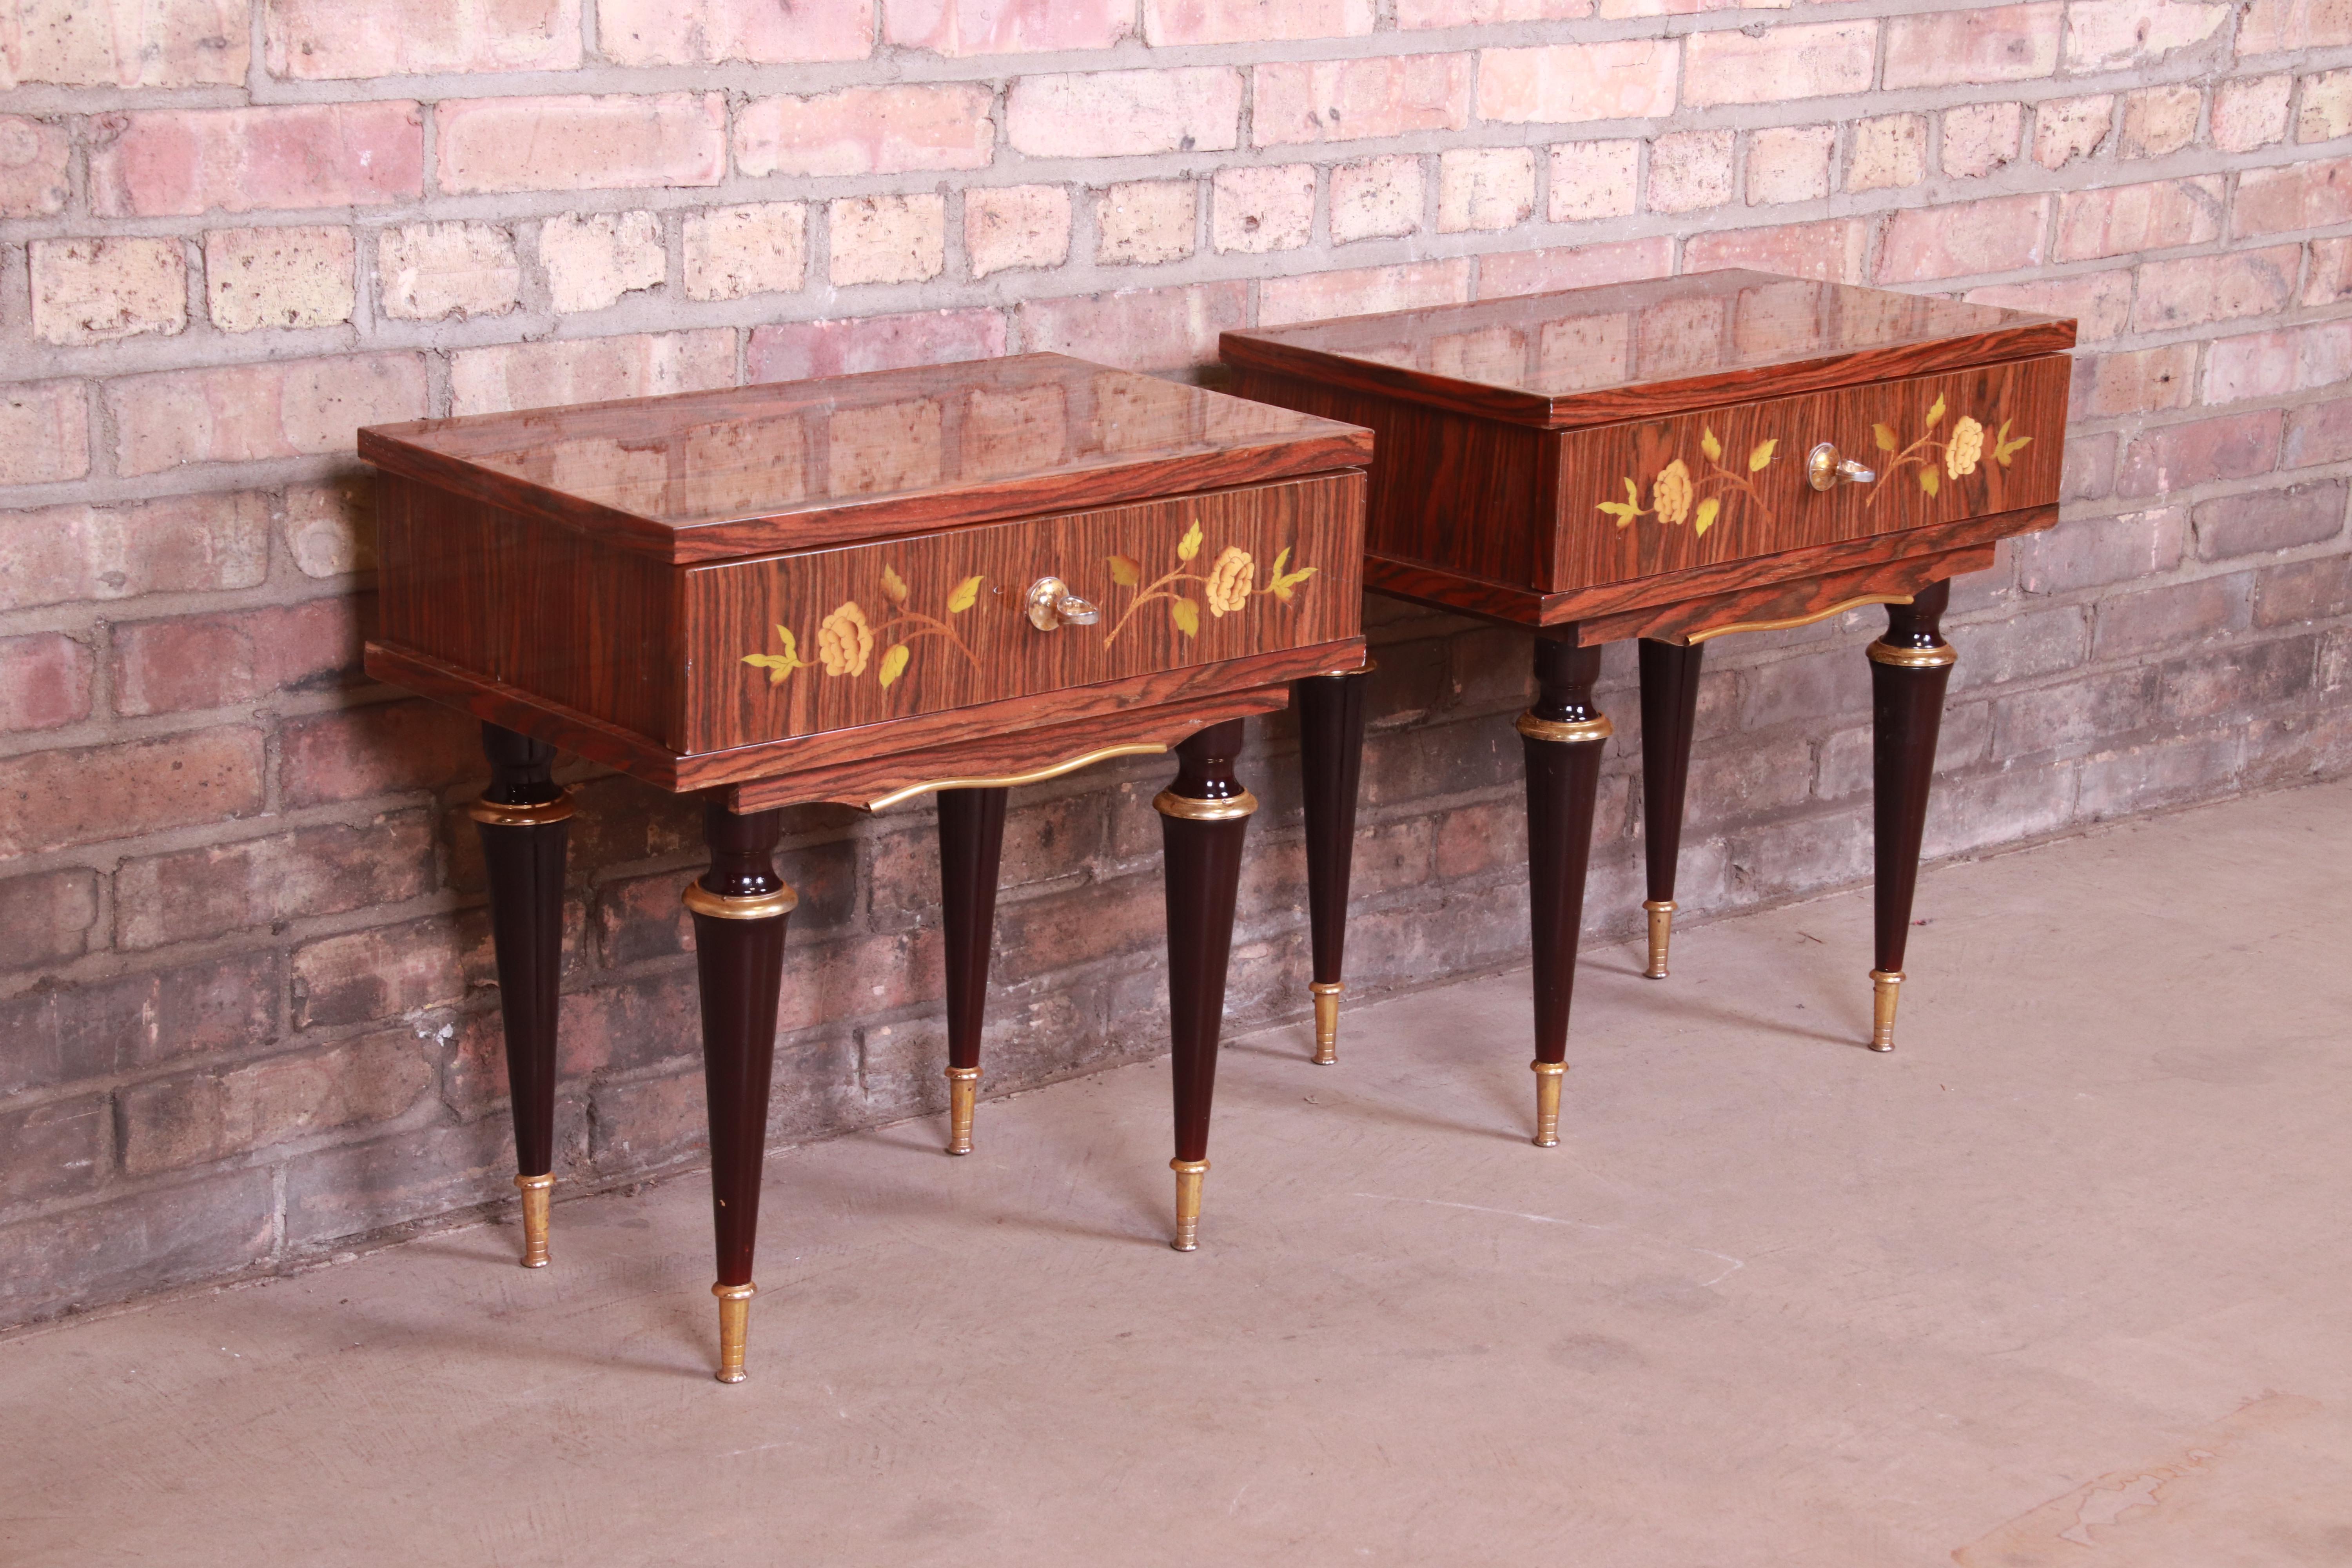 French Art Deco Macassar Ebony Inlaid Marquetry Nightstands, Circa 1950s For Sale 1